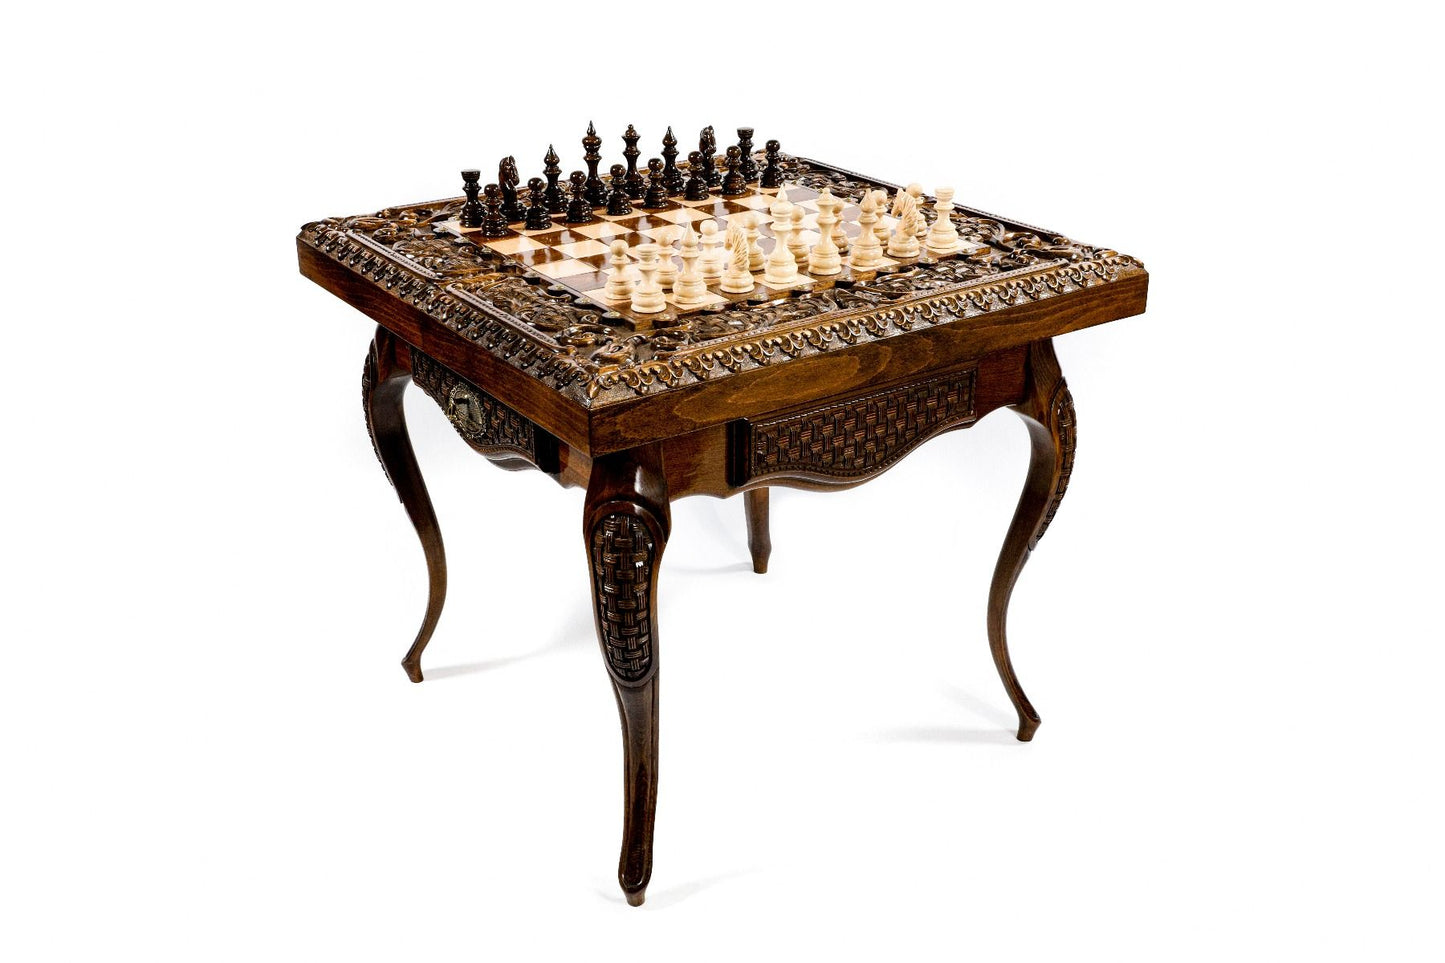 Close-up of the reversible chess and backgammon board on the 'Opulent Dual-Play' table, highlighting intricate inlay work.